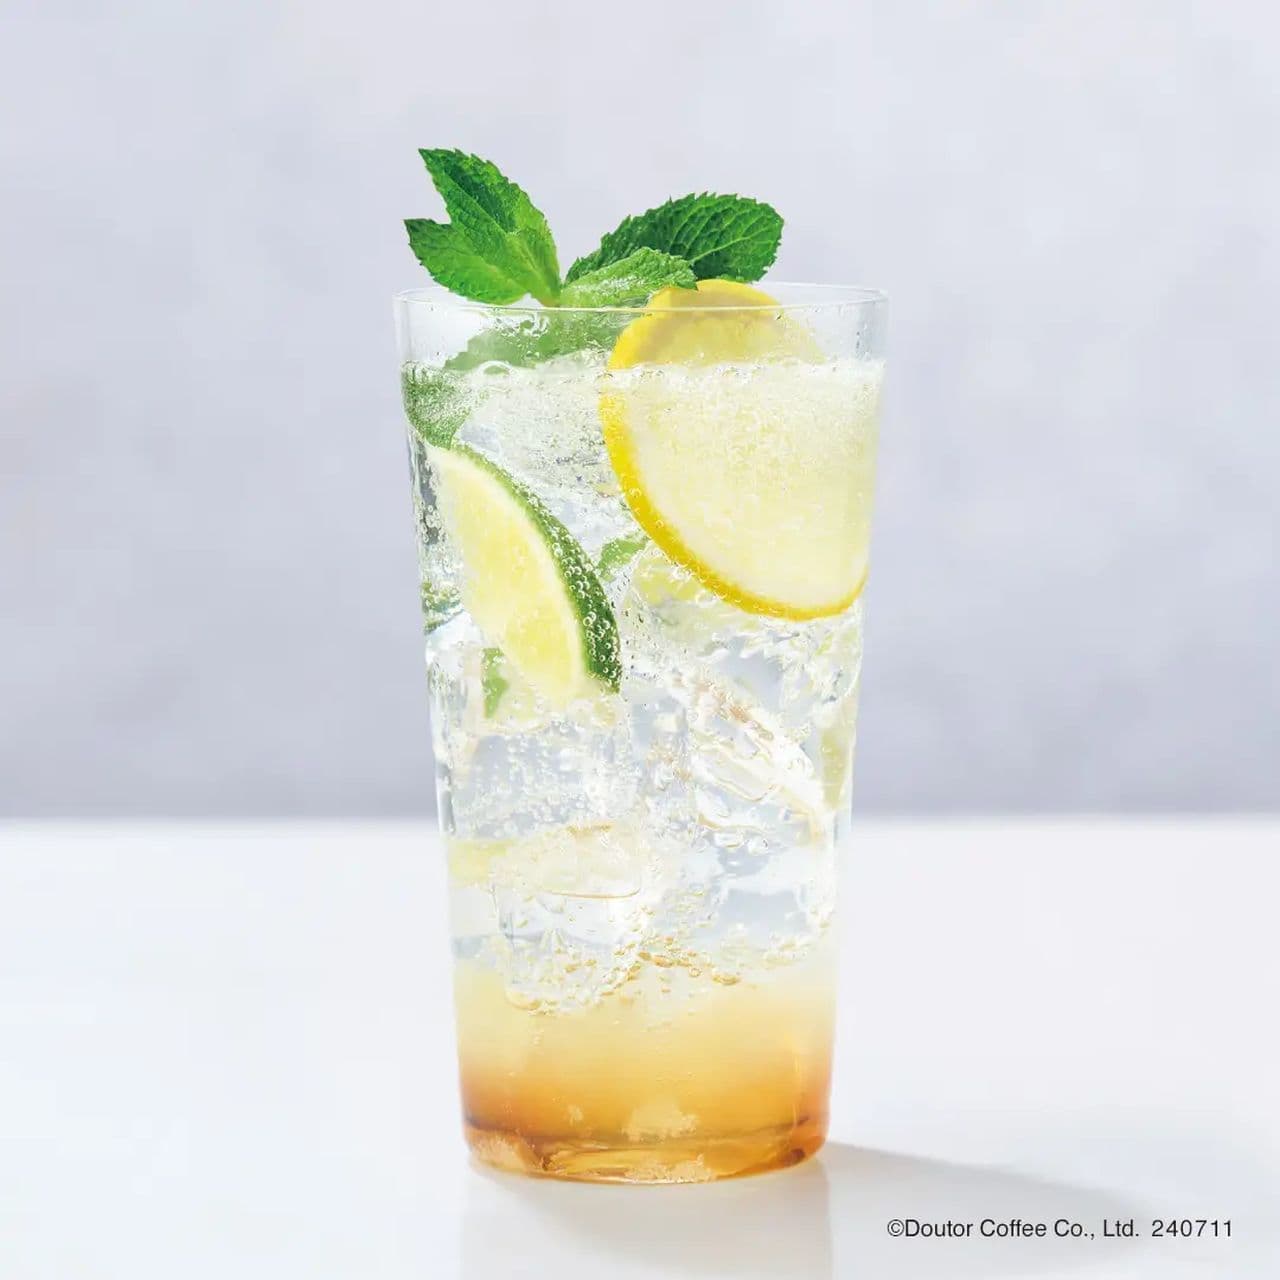 Excelsior Cafe "Citrus Mojito with Elderflower